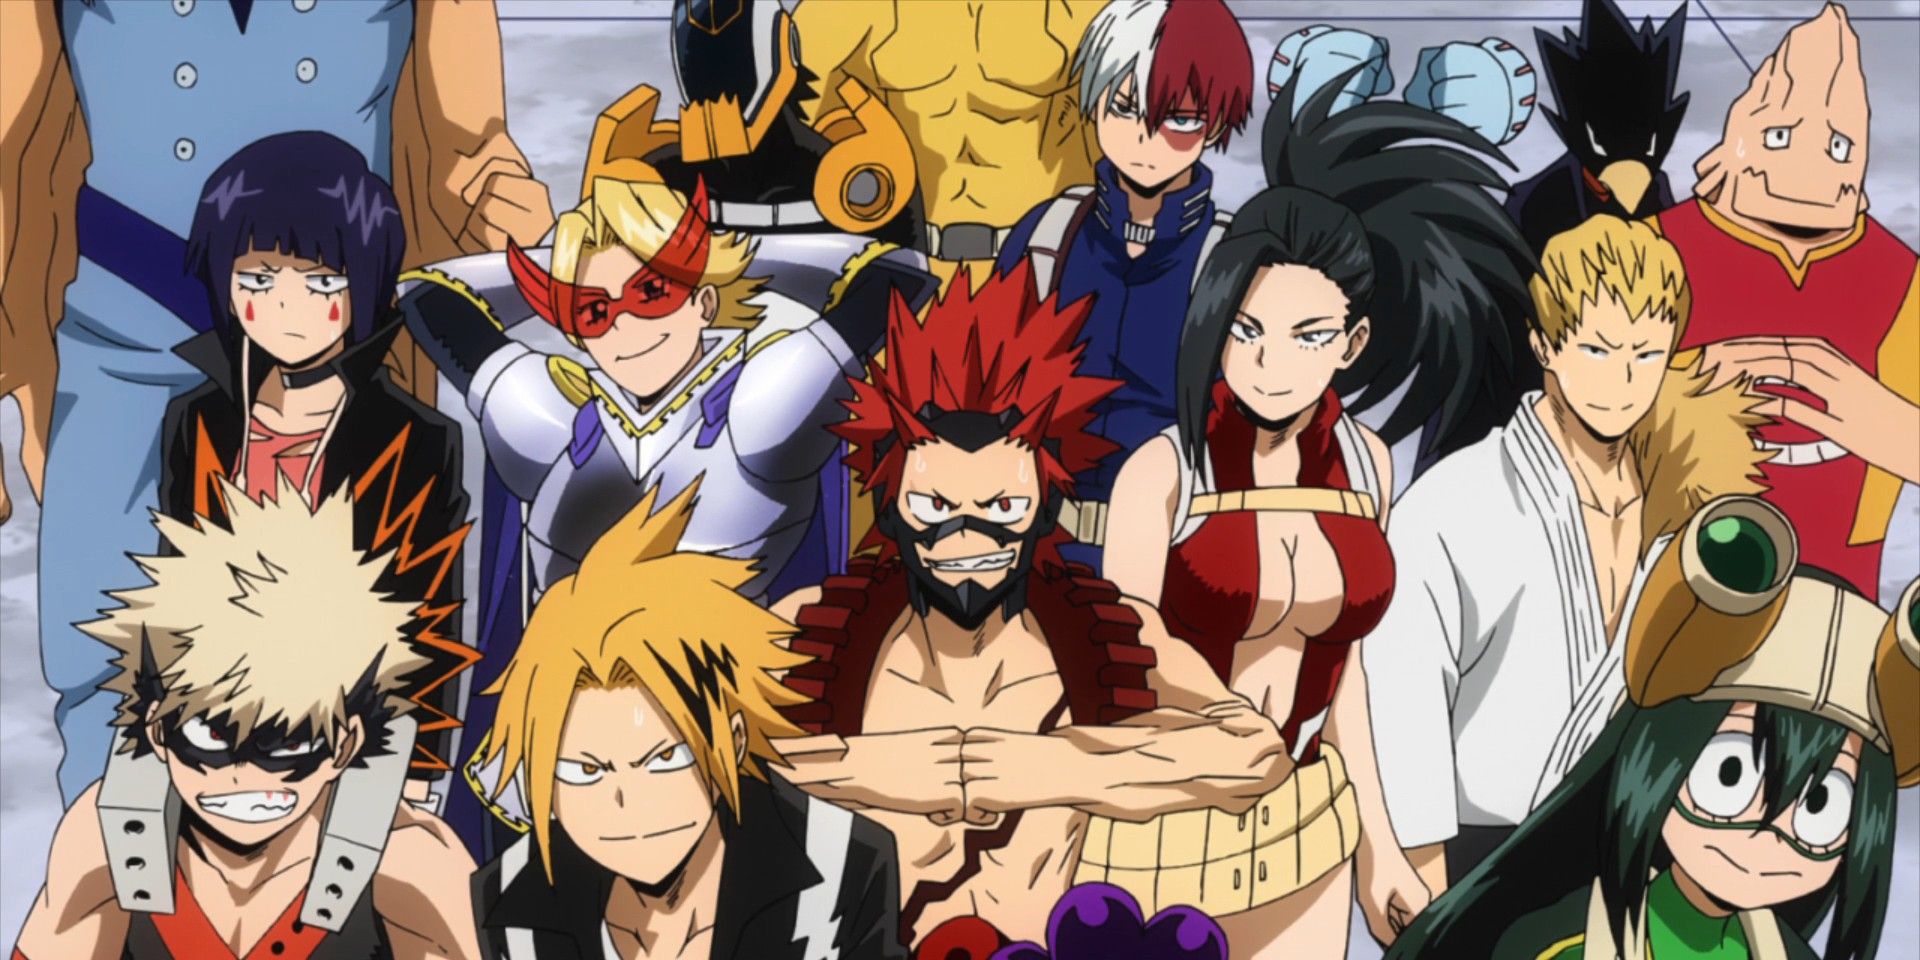 Class 1-A from My Hero in their hero costumes.